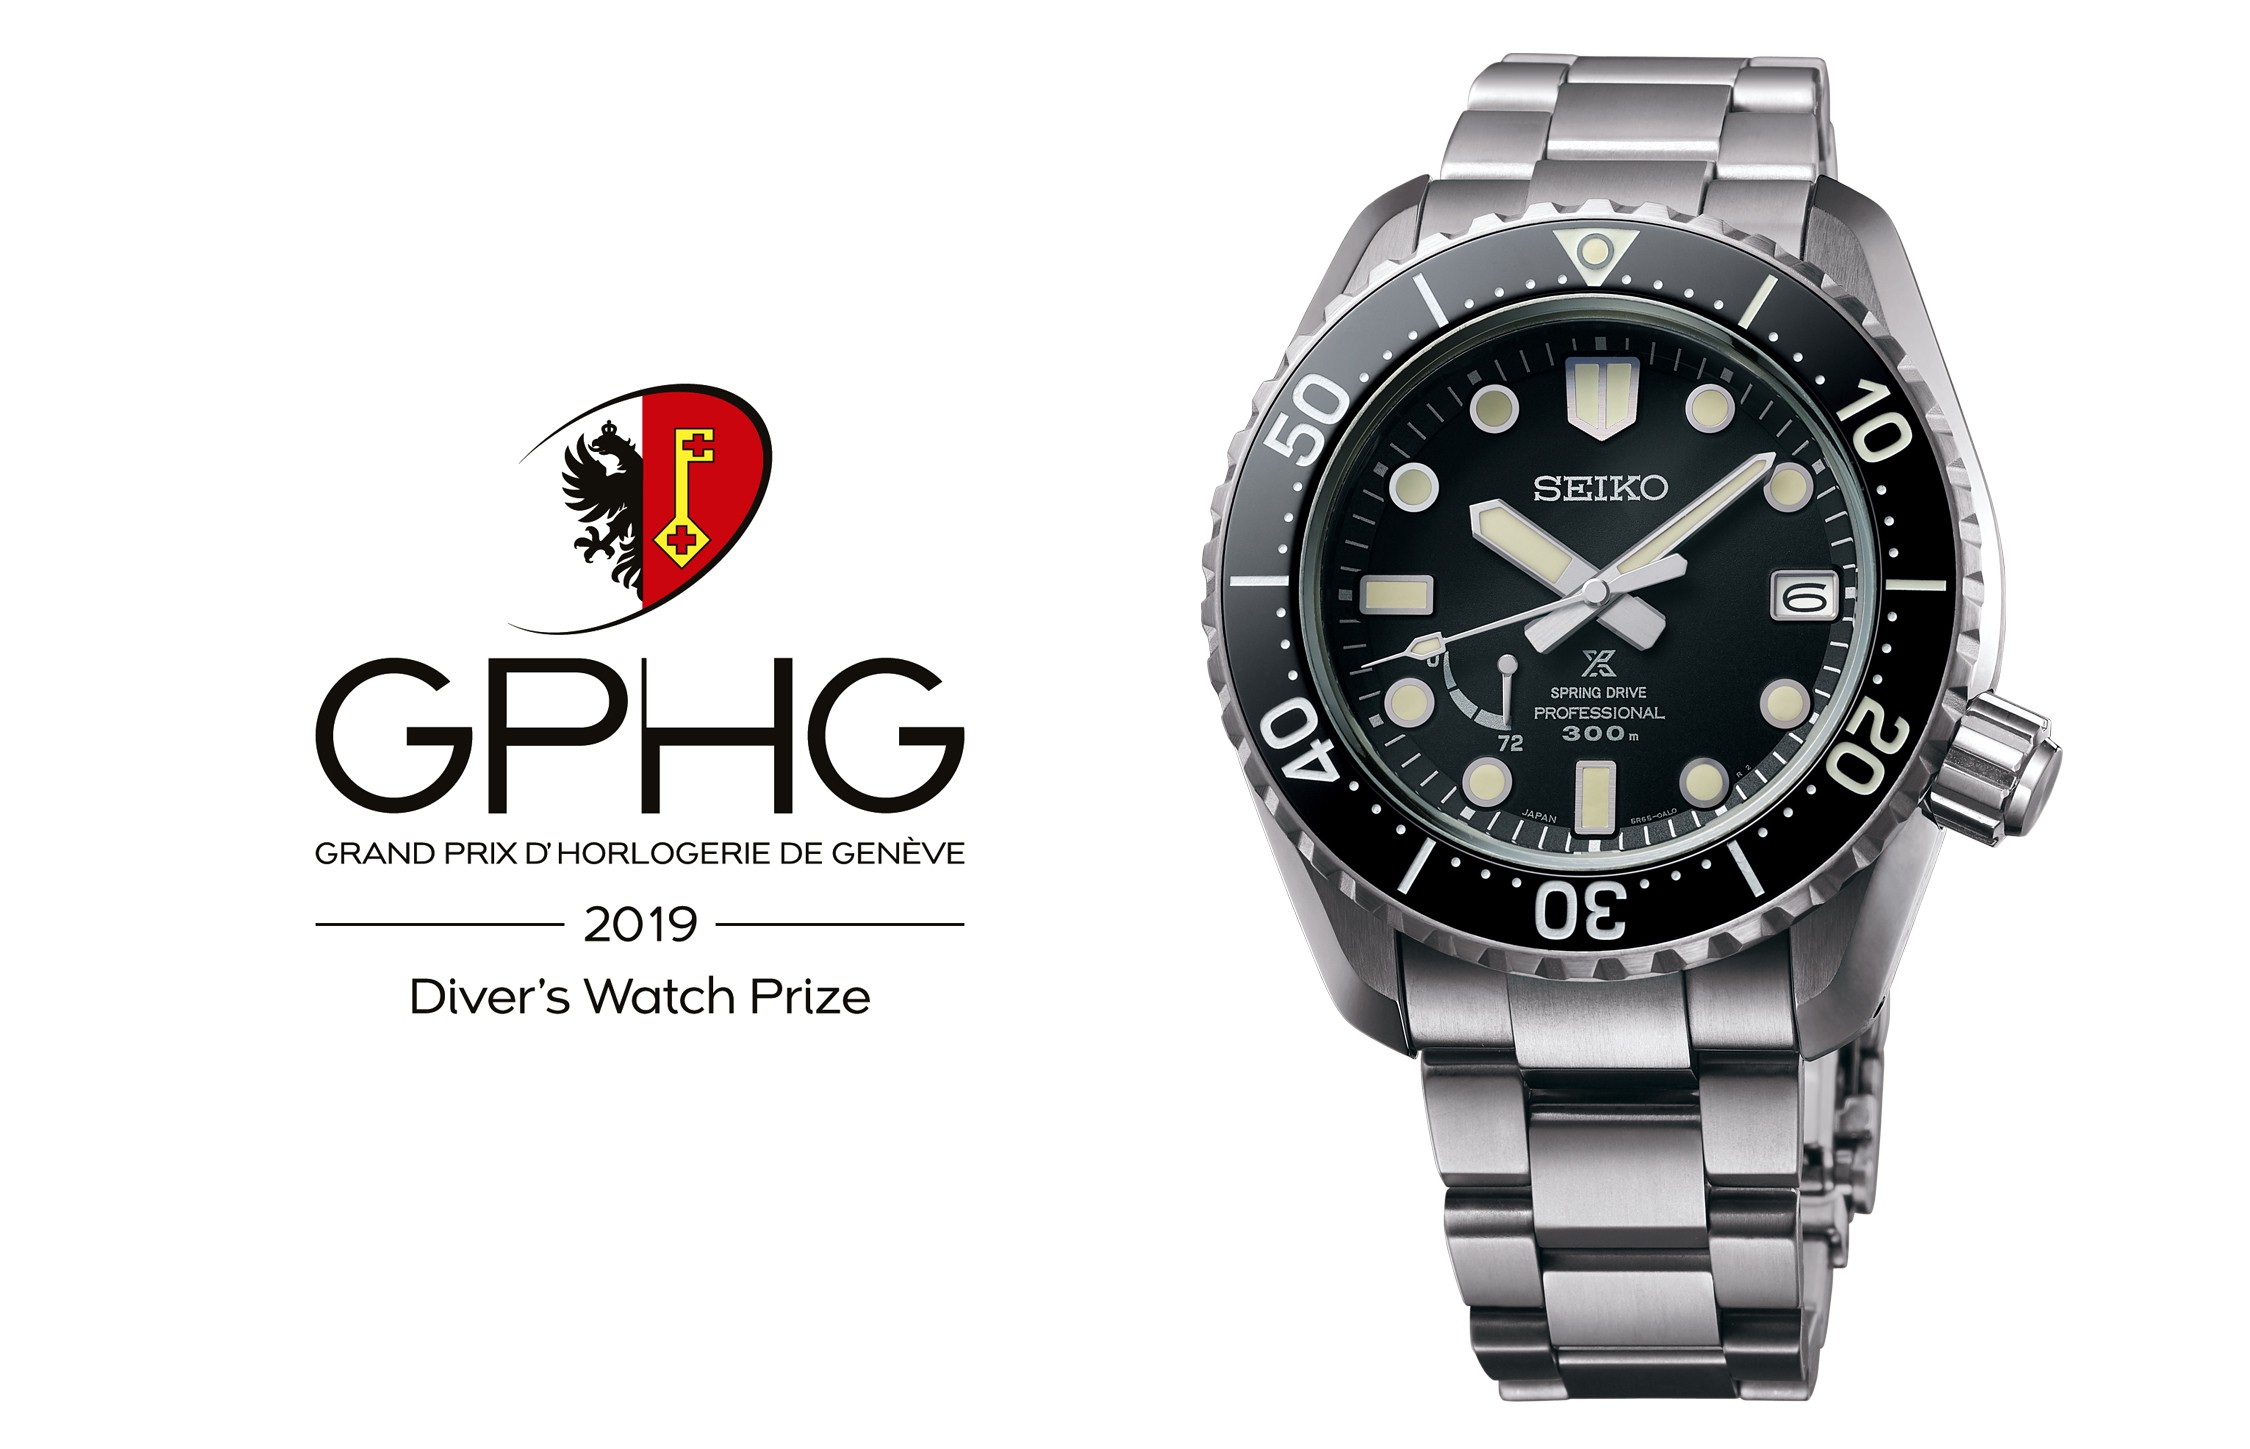 The Seiko Prospex LX Line Diver's wins the Diver's Watch at the 2019 Grand Prix d'Horlogerie de Genève. A consecutive honor for Seiko in the sports/diver's category. | Seiko Watch Corporation